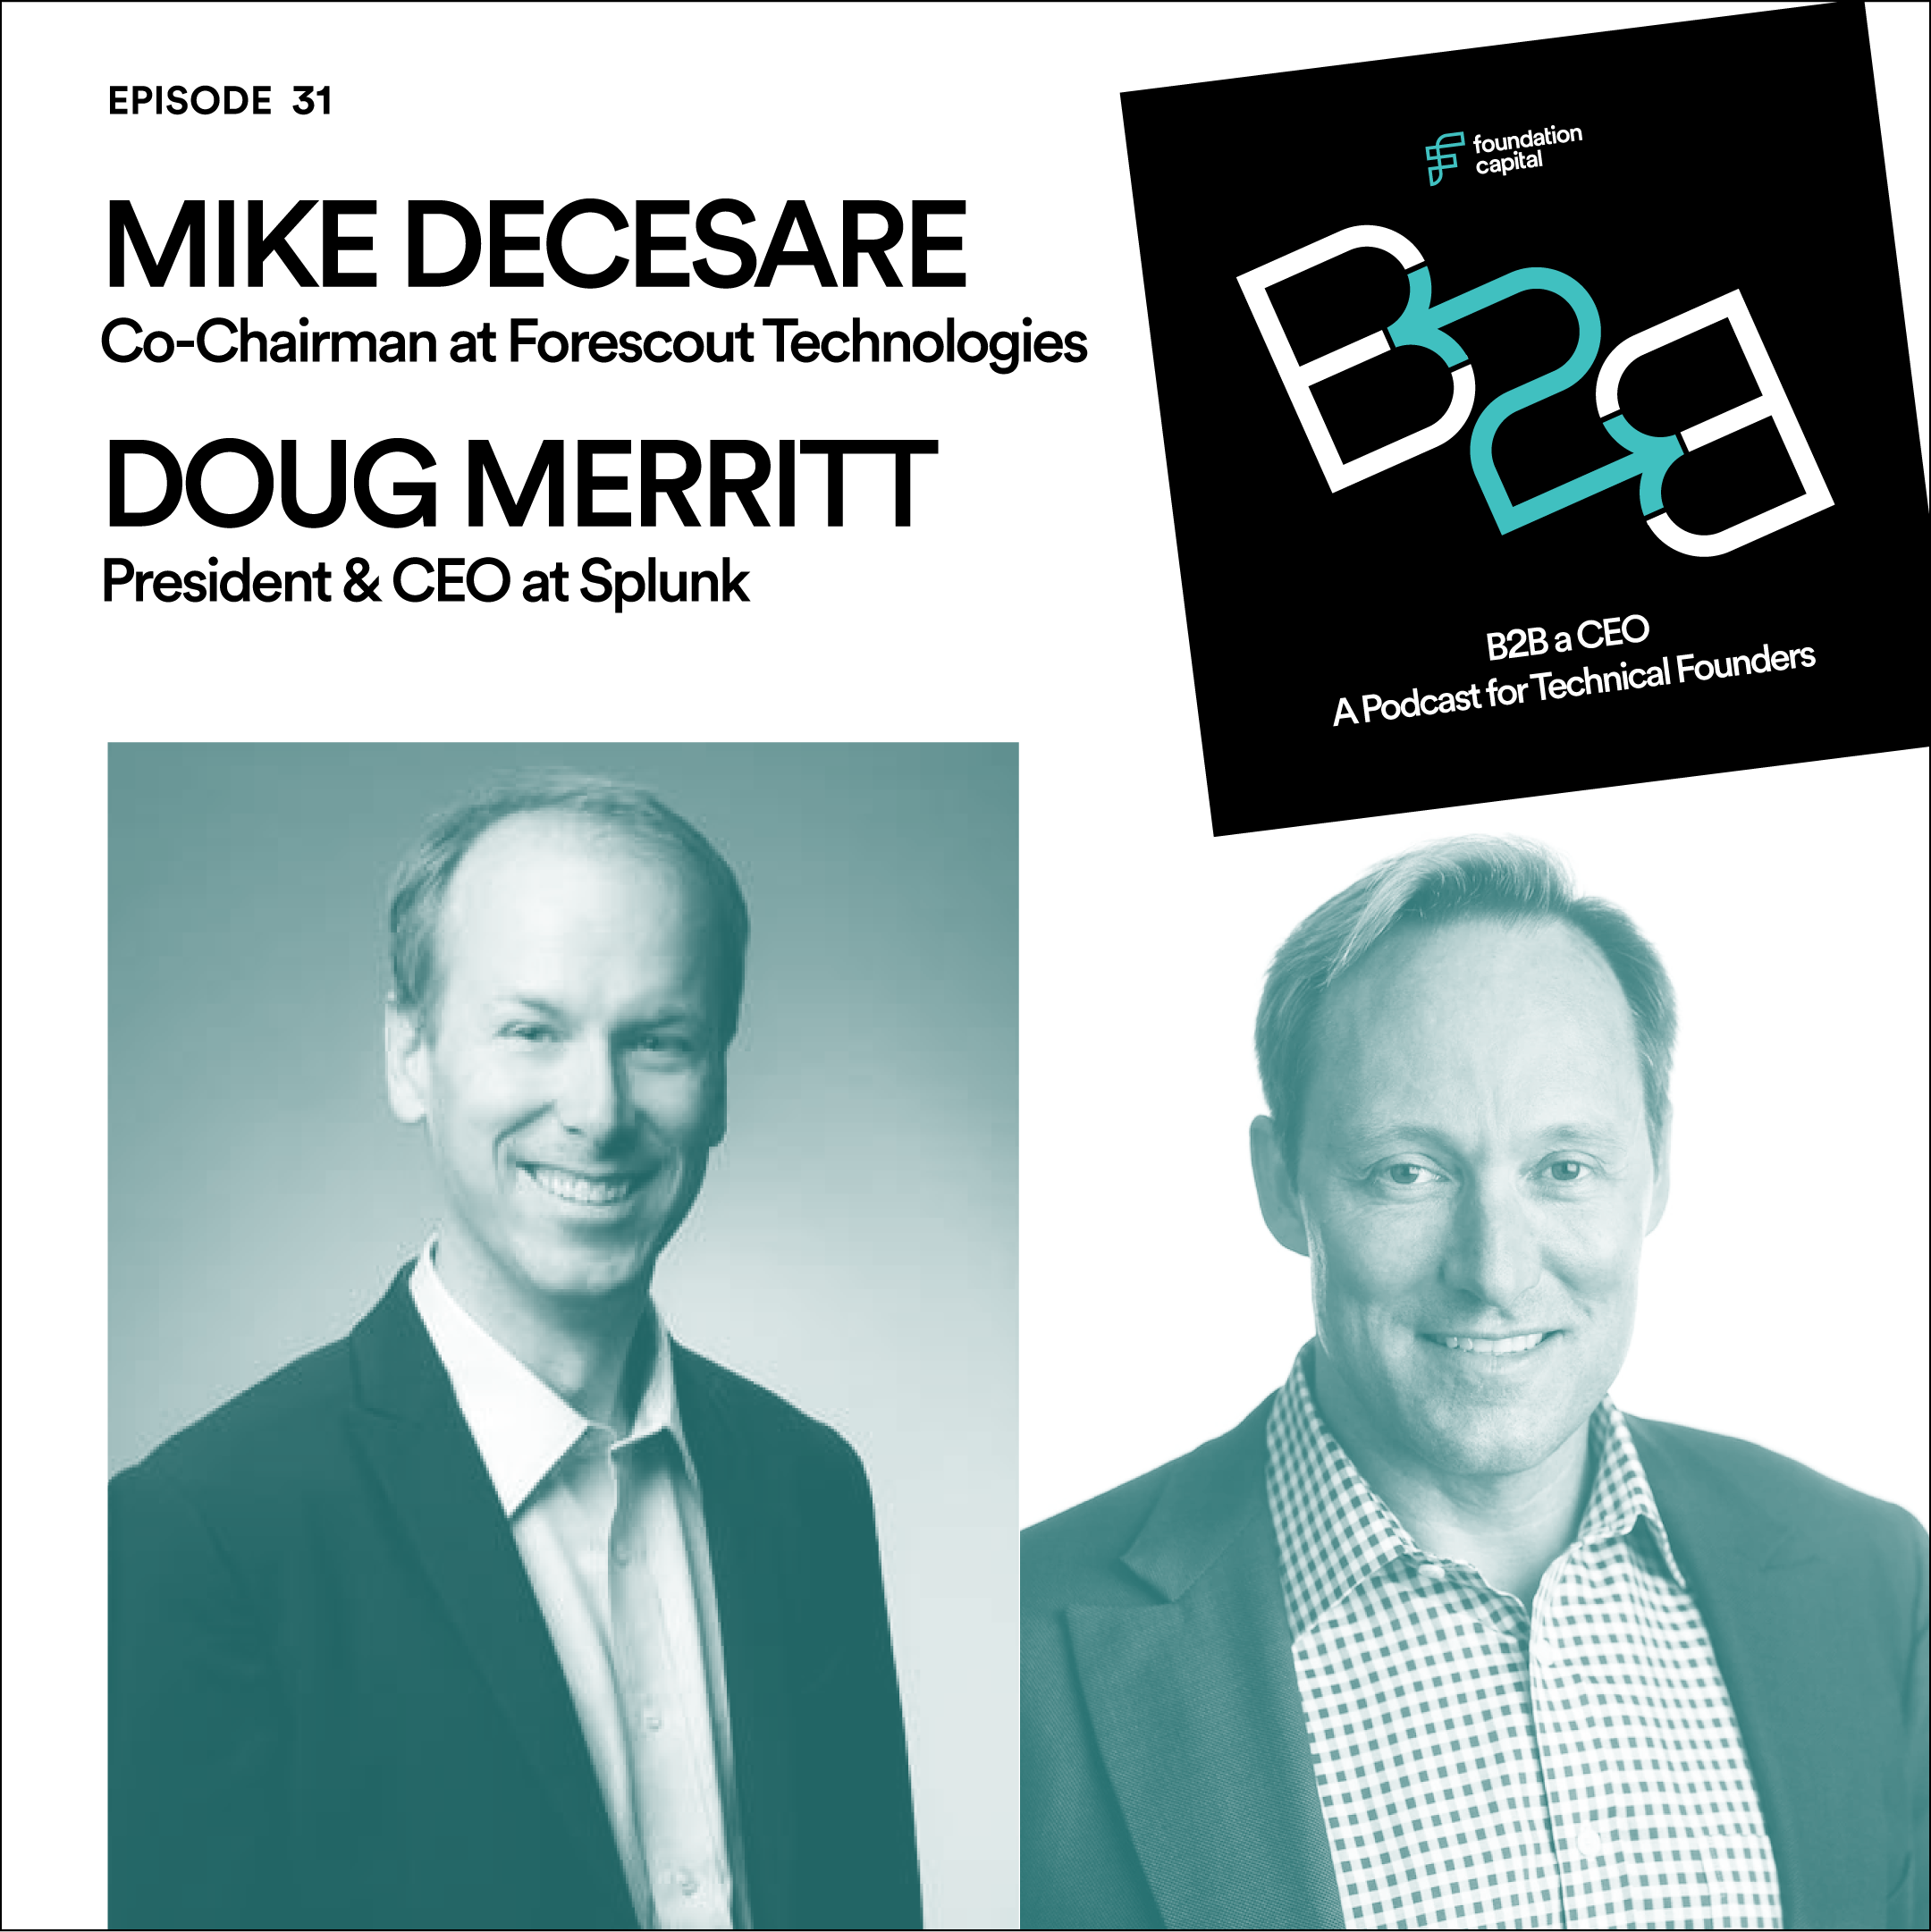 Mike Decesare, co chairman at forescout technologies and doug merrit, president and ceo at splunk